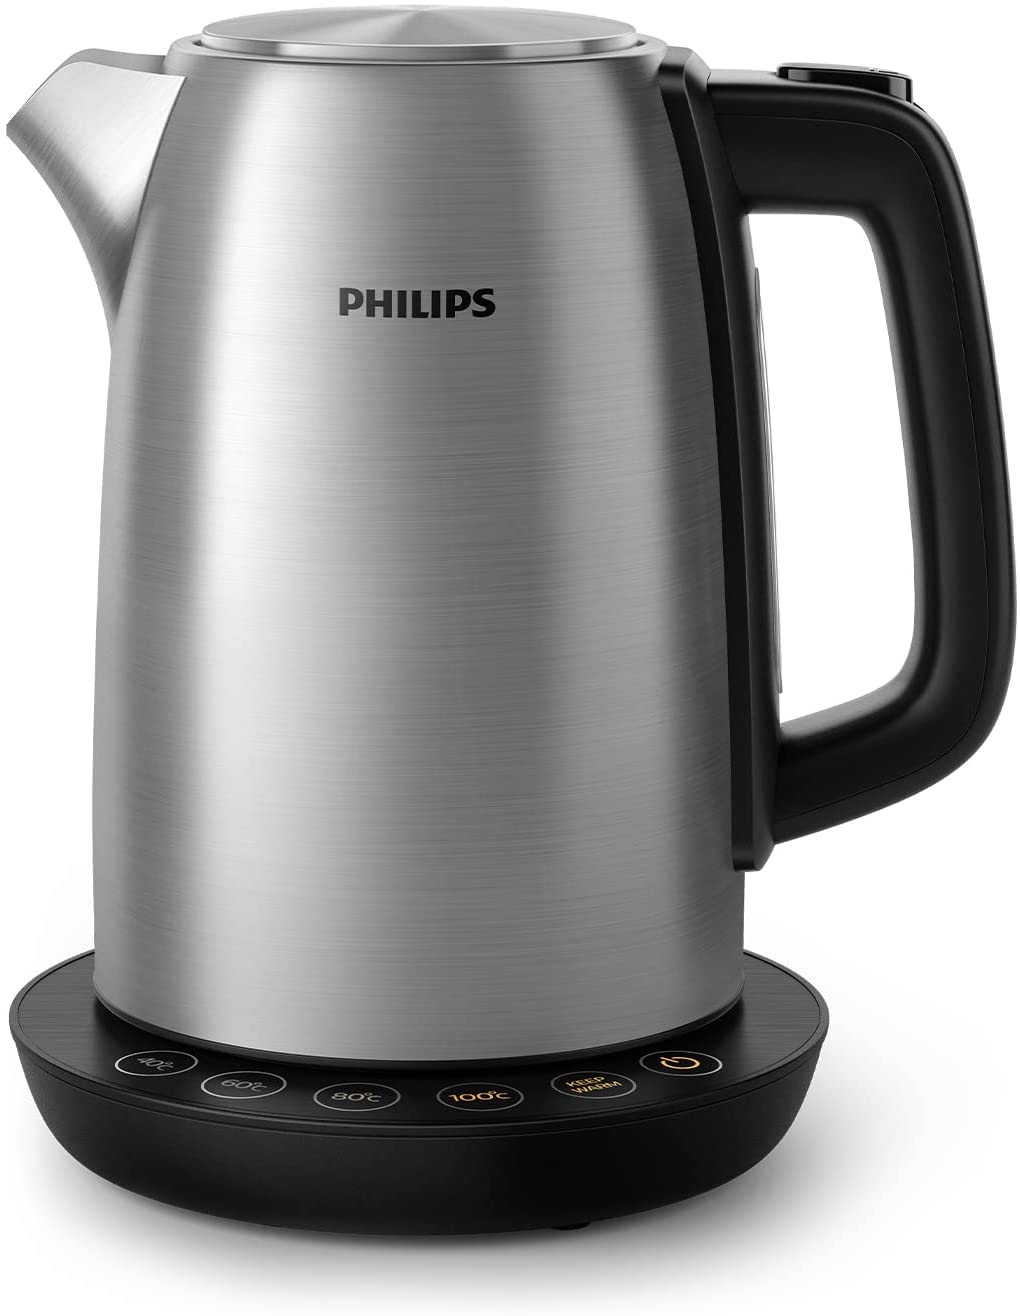 Philips HD9359/90 Stainless Steel Kettle, for everything from Tea to Baby Food (2200 Watt, 1.7 Litres, Keep Warm Function)